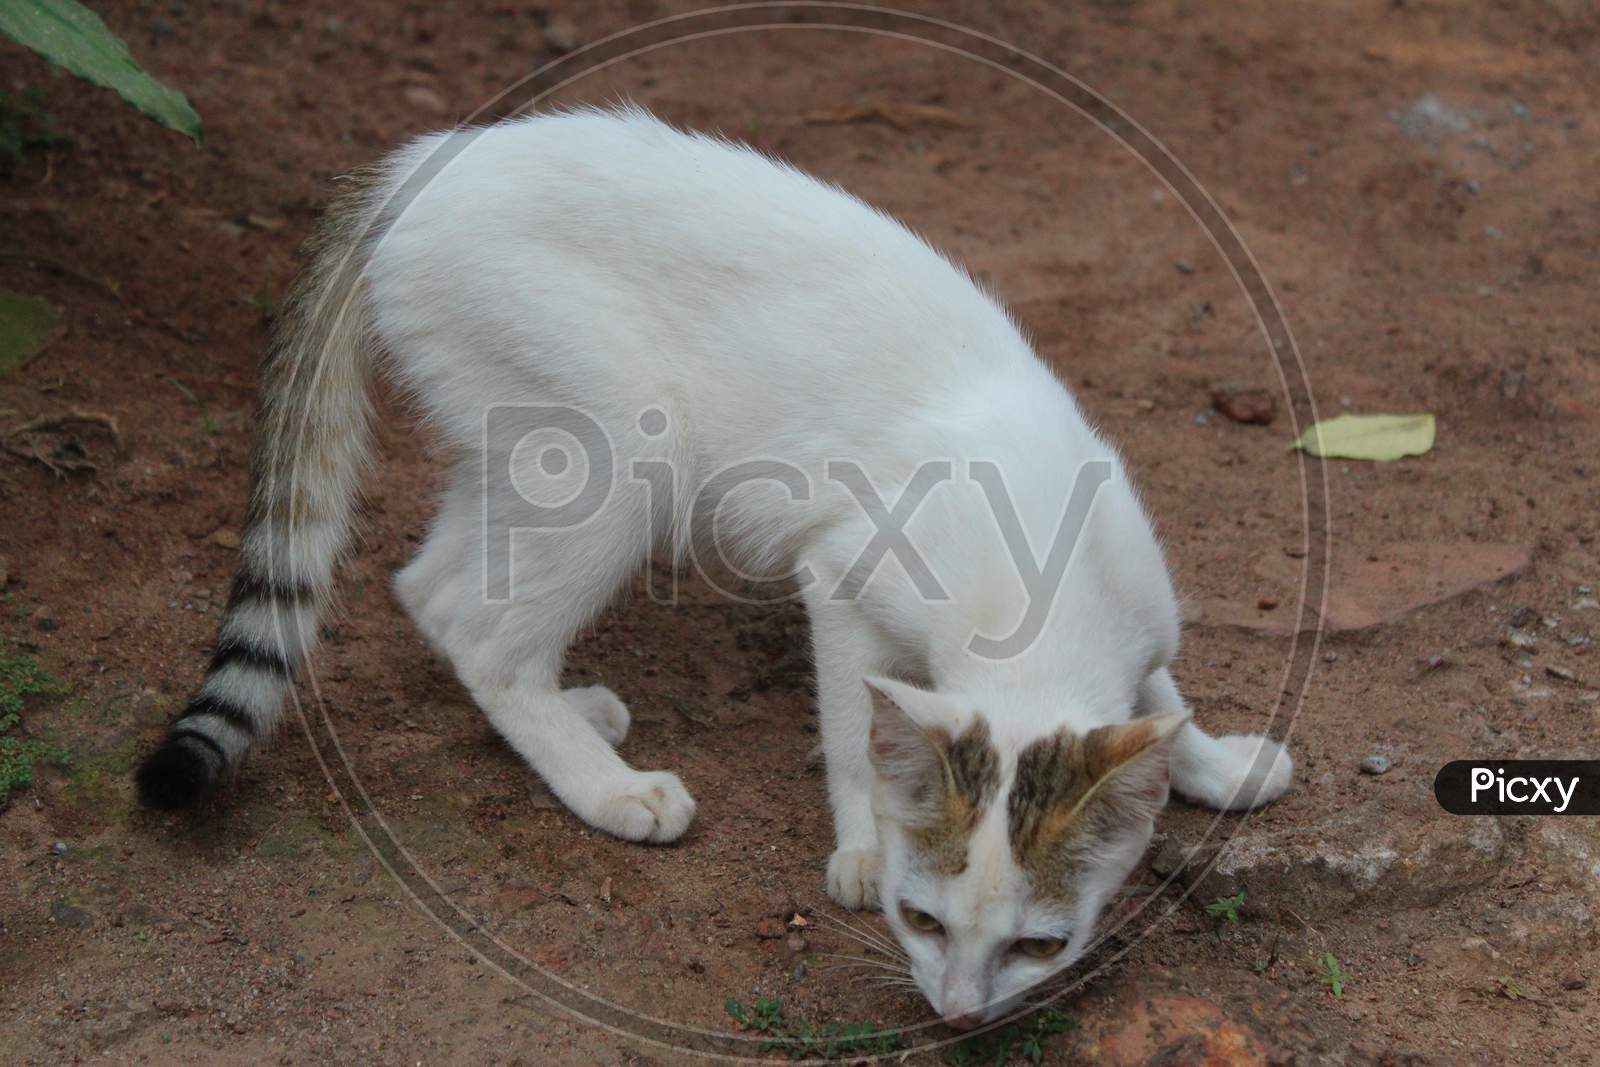 WHITE CAT WITH LONG TAIL